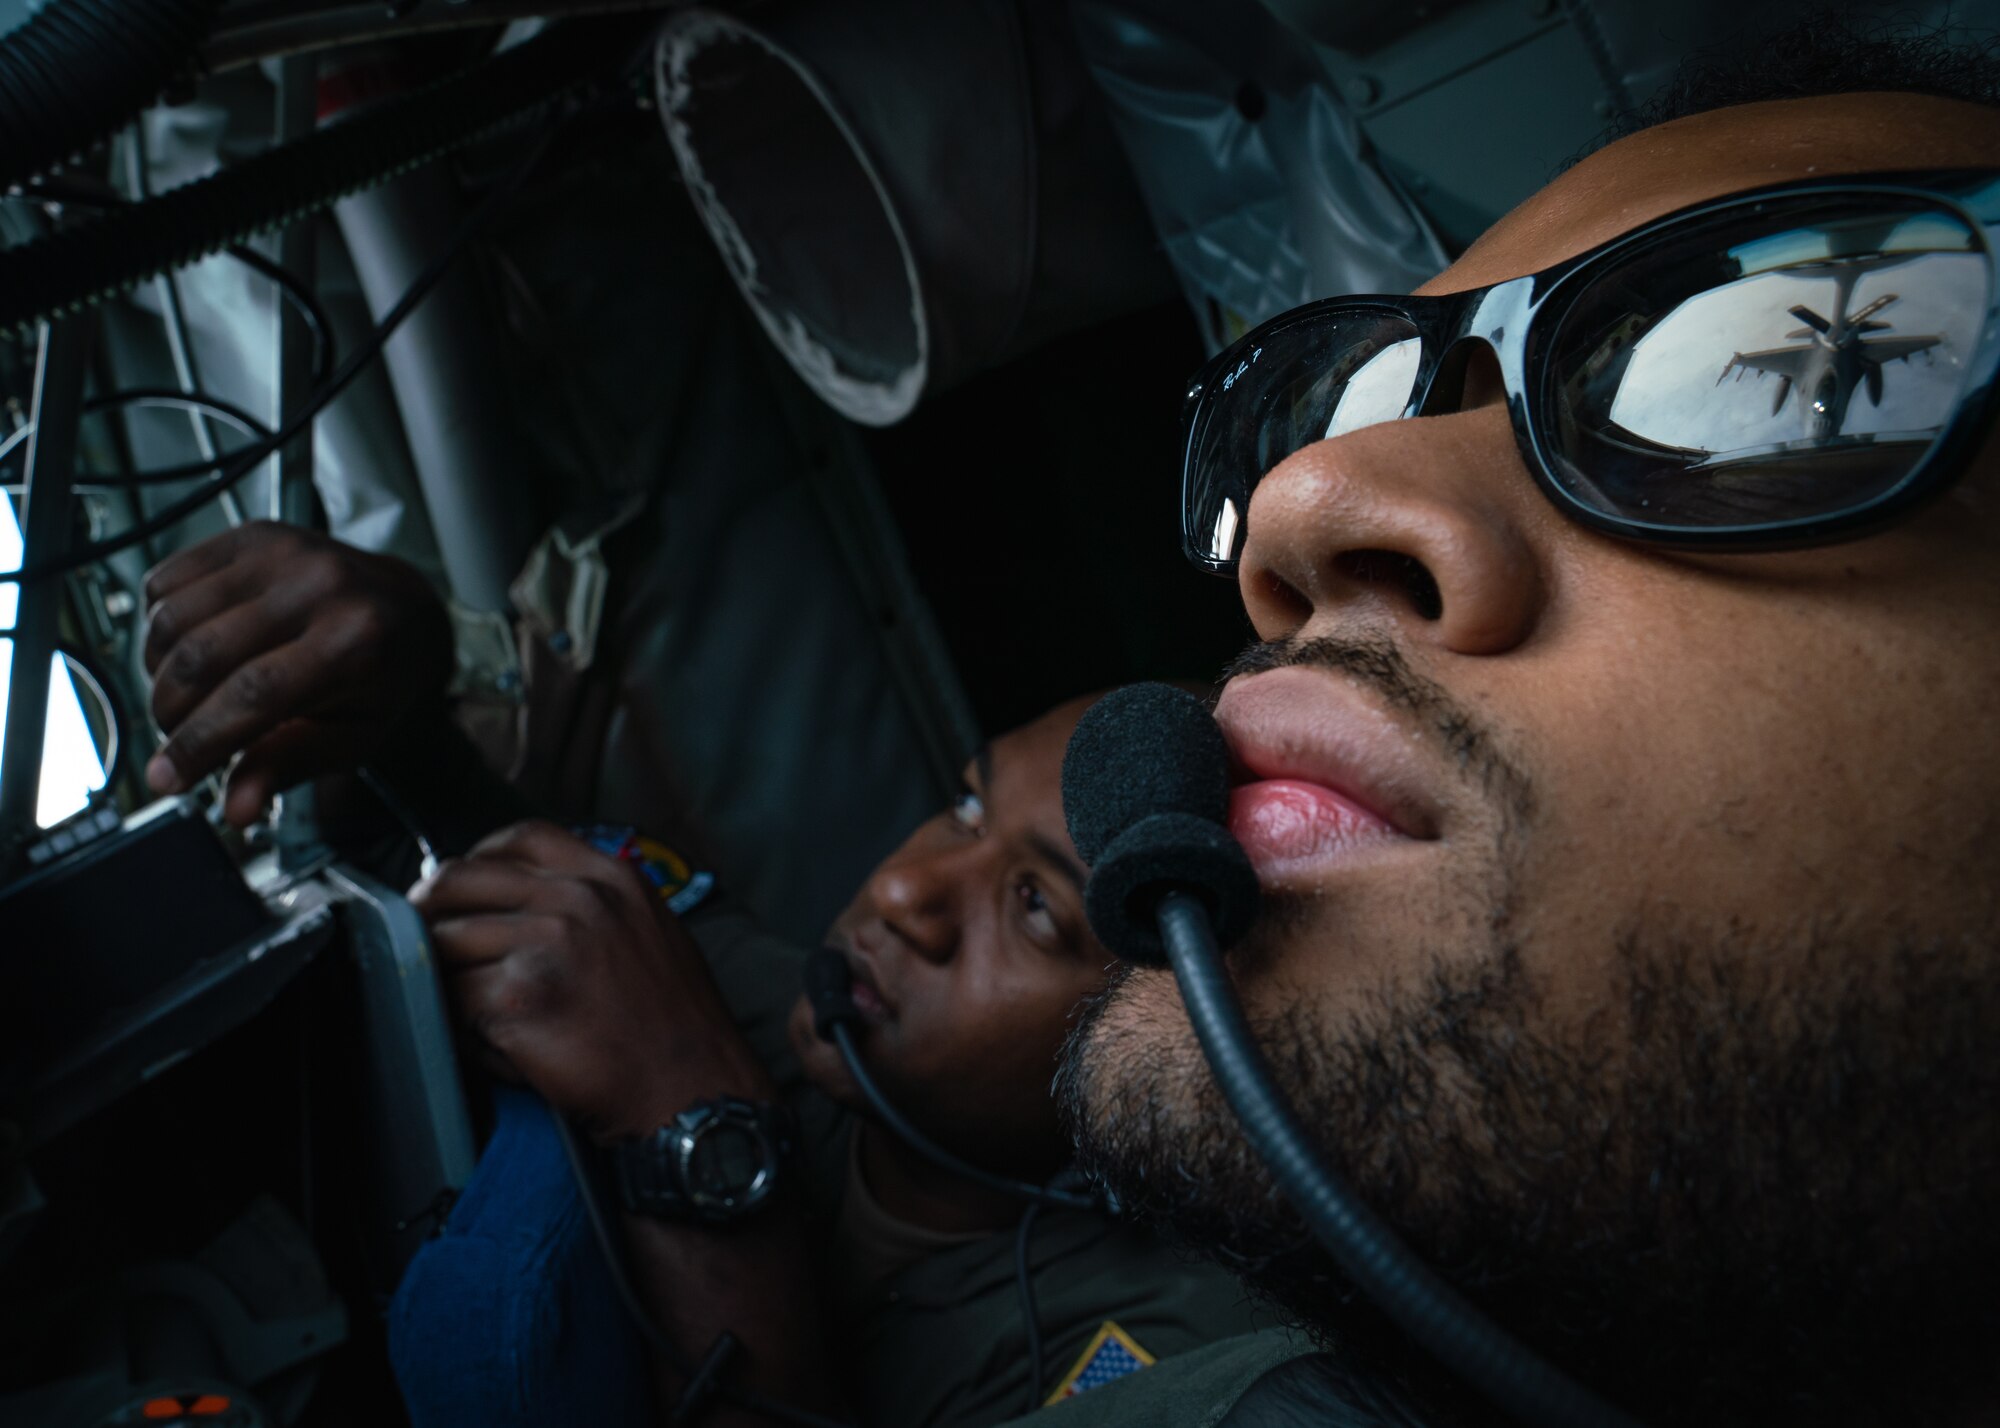 U.S. Air Force Staff Sgt. Kevin Satberry, 91st Air Refueling Squadron instructor boom operator, left, evaluates Senior Airman Caleb Mills, 91st ARS boom operator, right, during a refueling exercise over Alabama, Dec. 21, 2021.